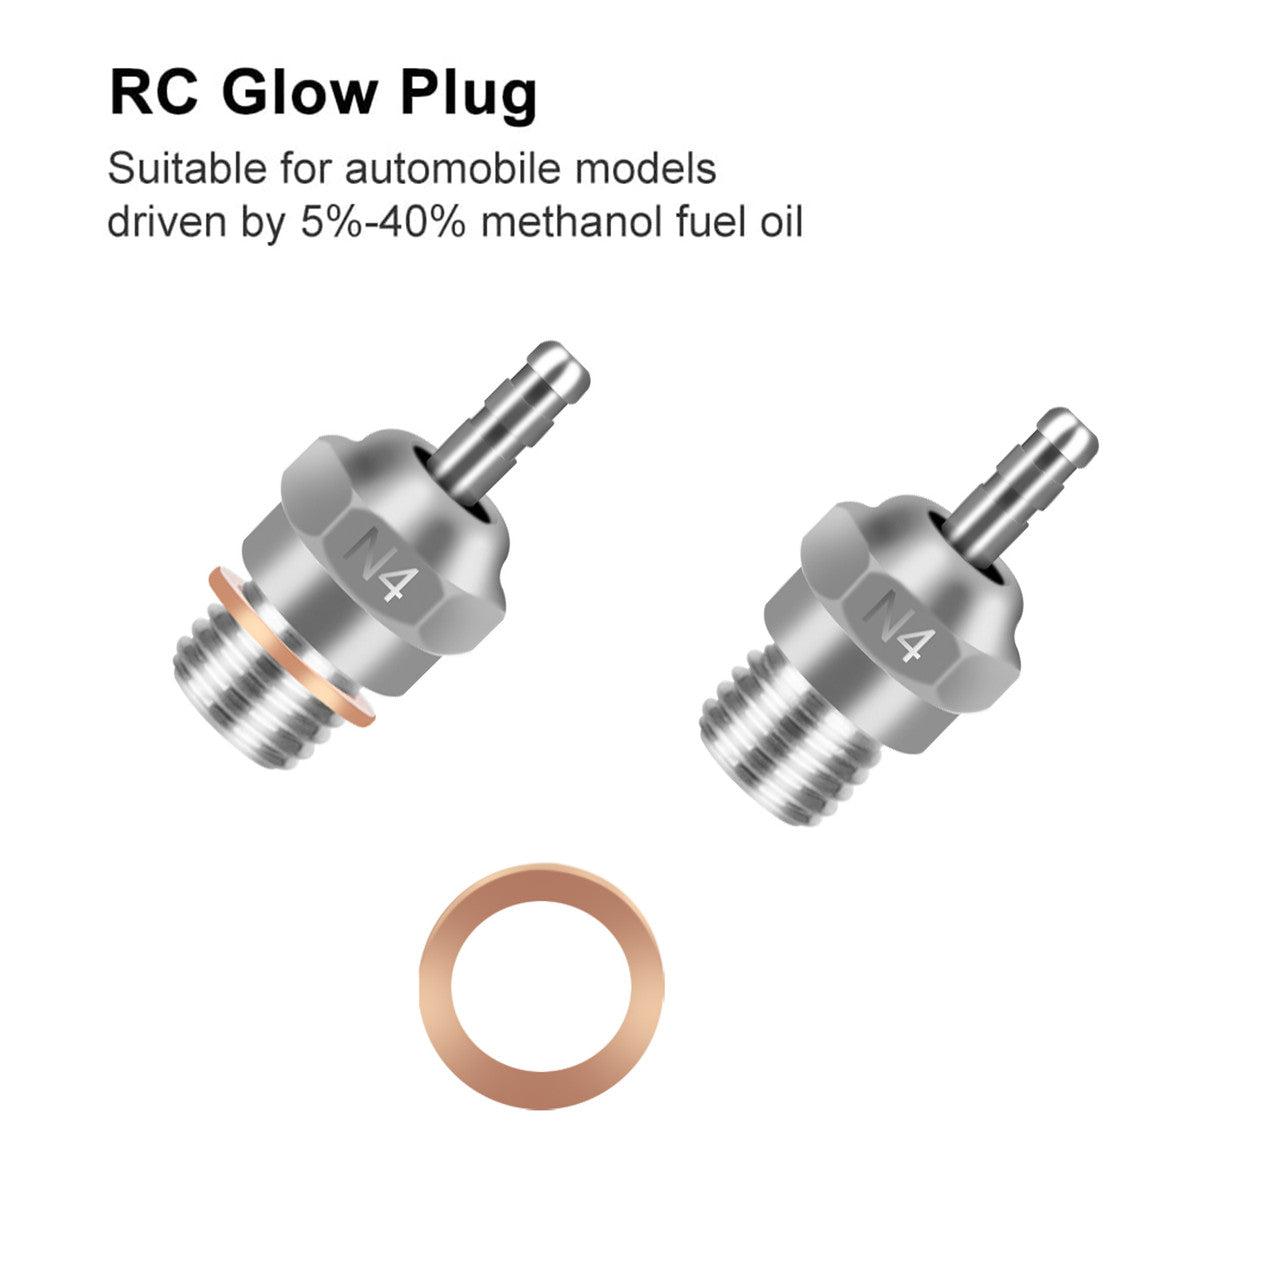 Glow Plug For Traxxas 3232X RC Cars with Improvements in Idle and Transition, 3PCS